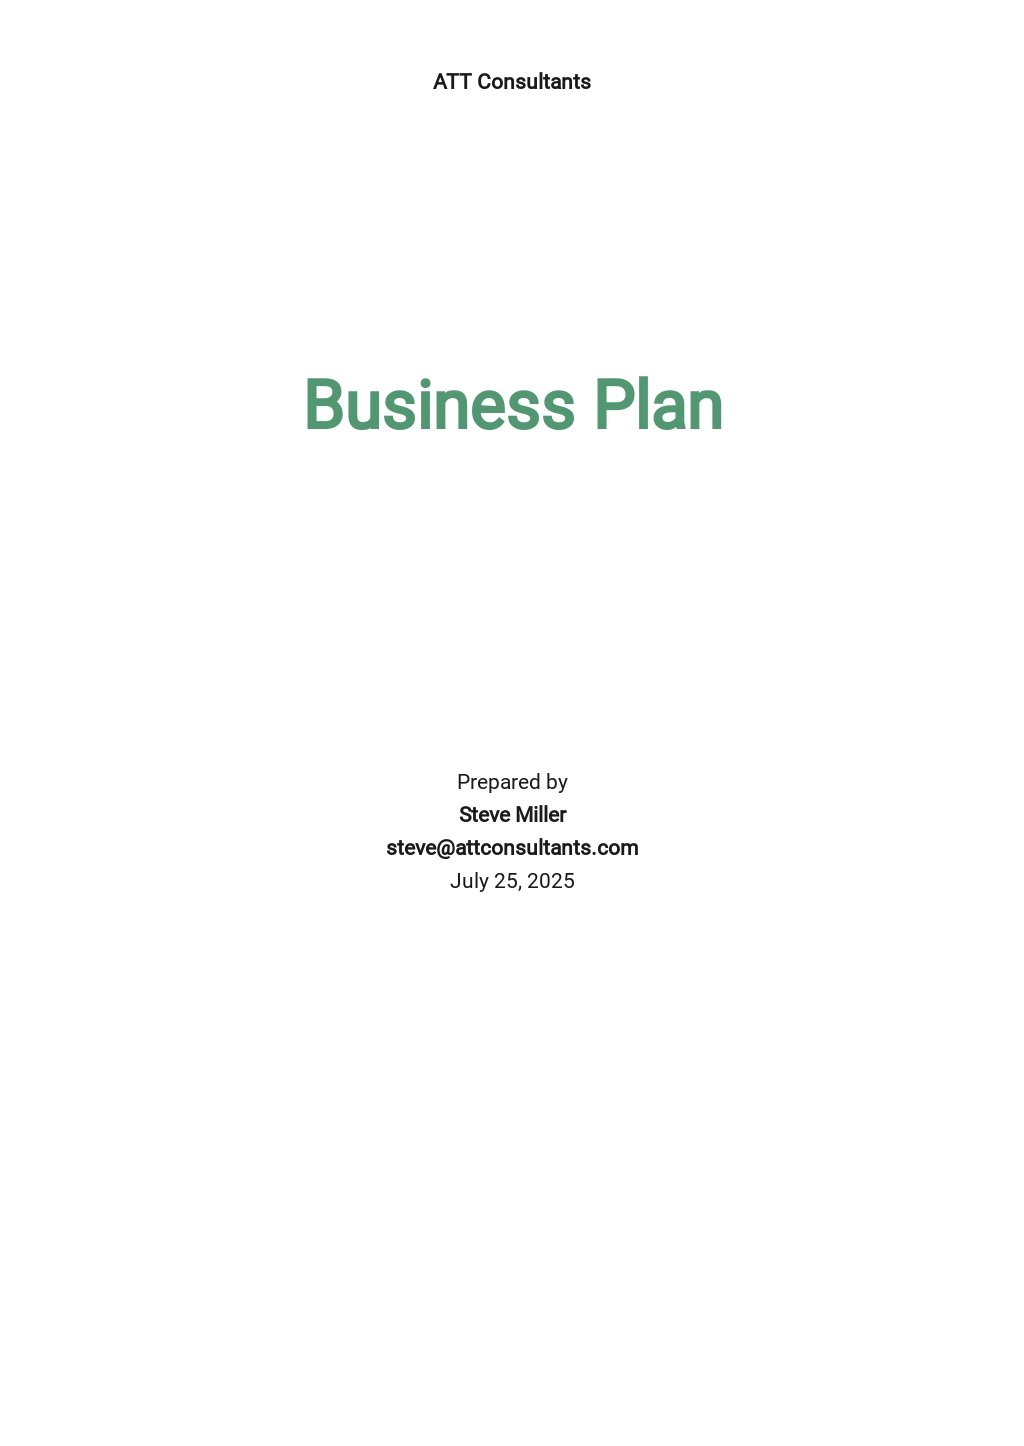 consulting firm business plan sample